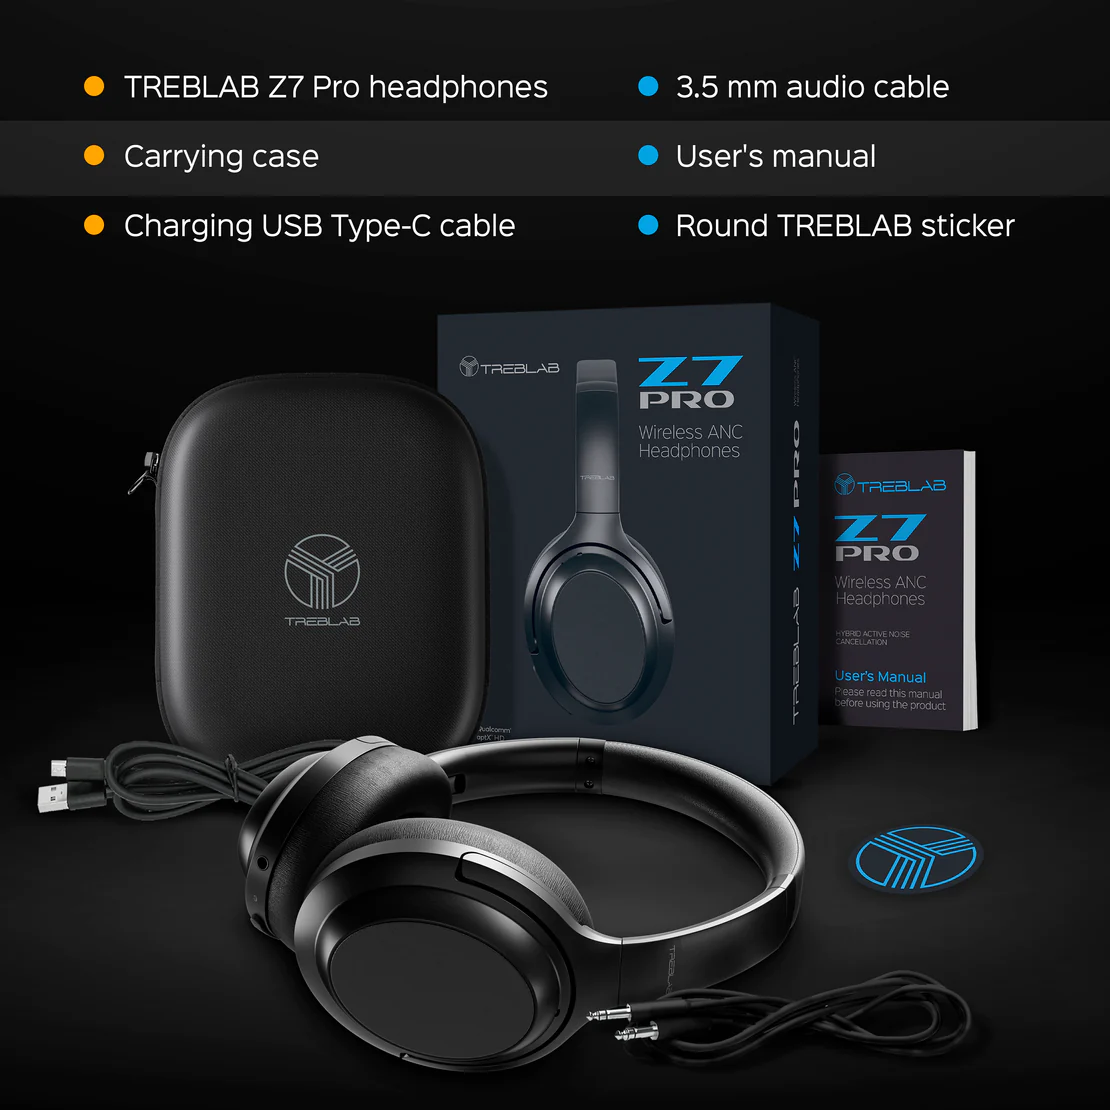 TREBLAB Z7 PRO - Hybrid Active Noise Cancelling Headphones - Pure aptX-HD Stereo Sound - 45H Playtime & USB-C Fast Charging - Over Ear Wireless Bluetooth Headphones with Mic, ANC Touch Control (Grey)